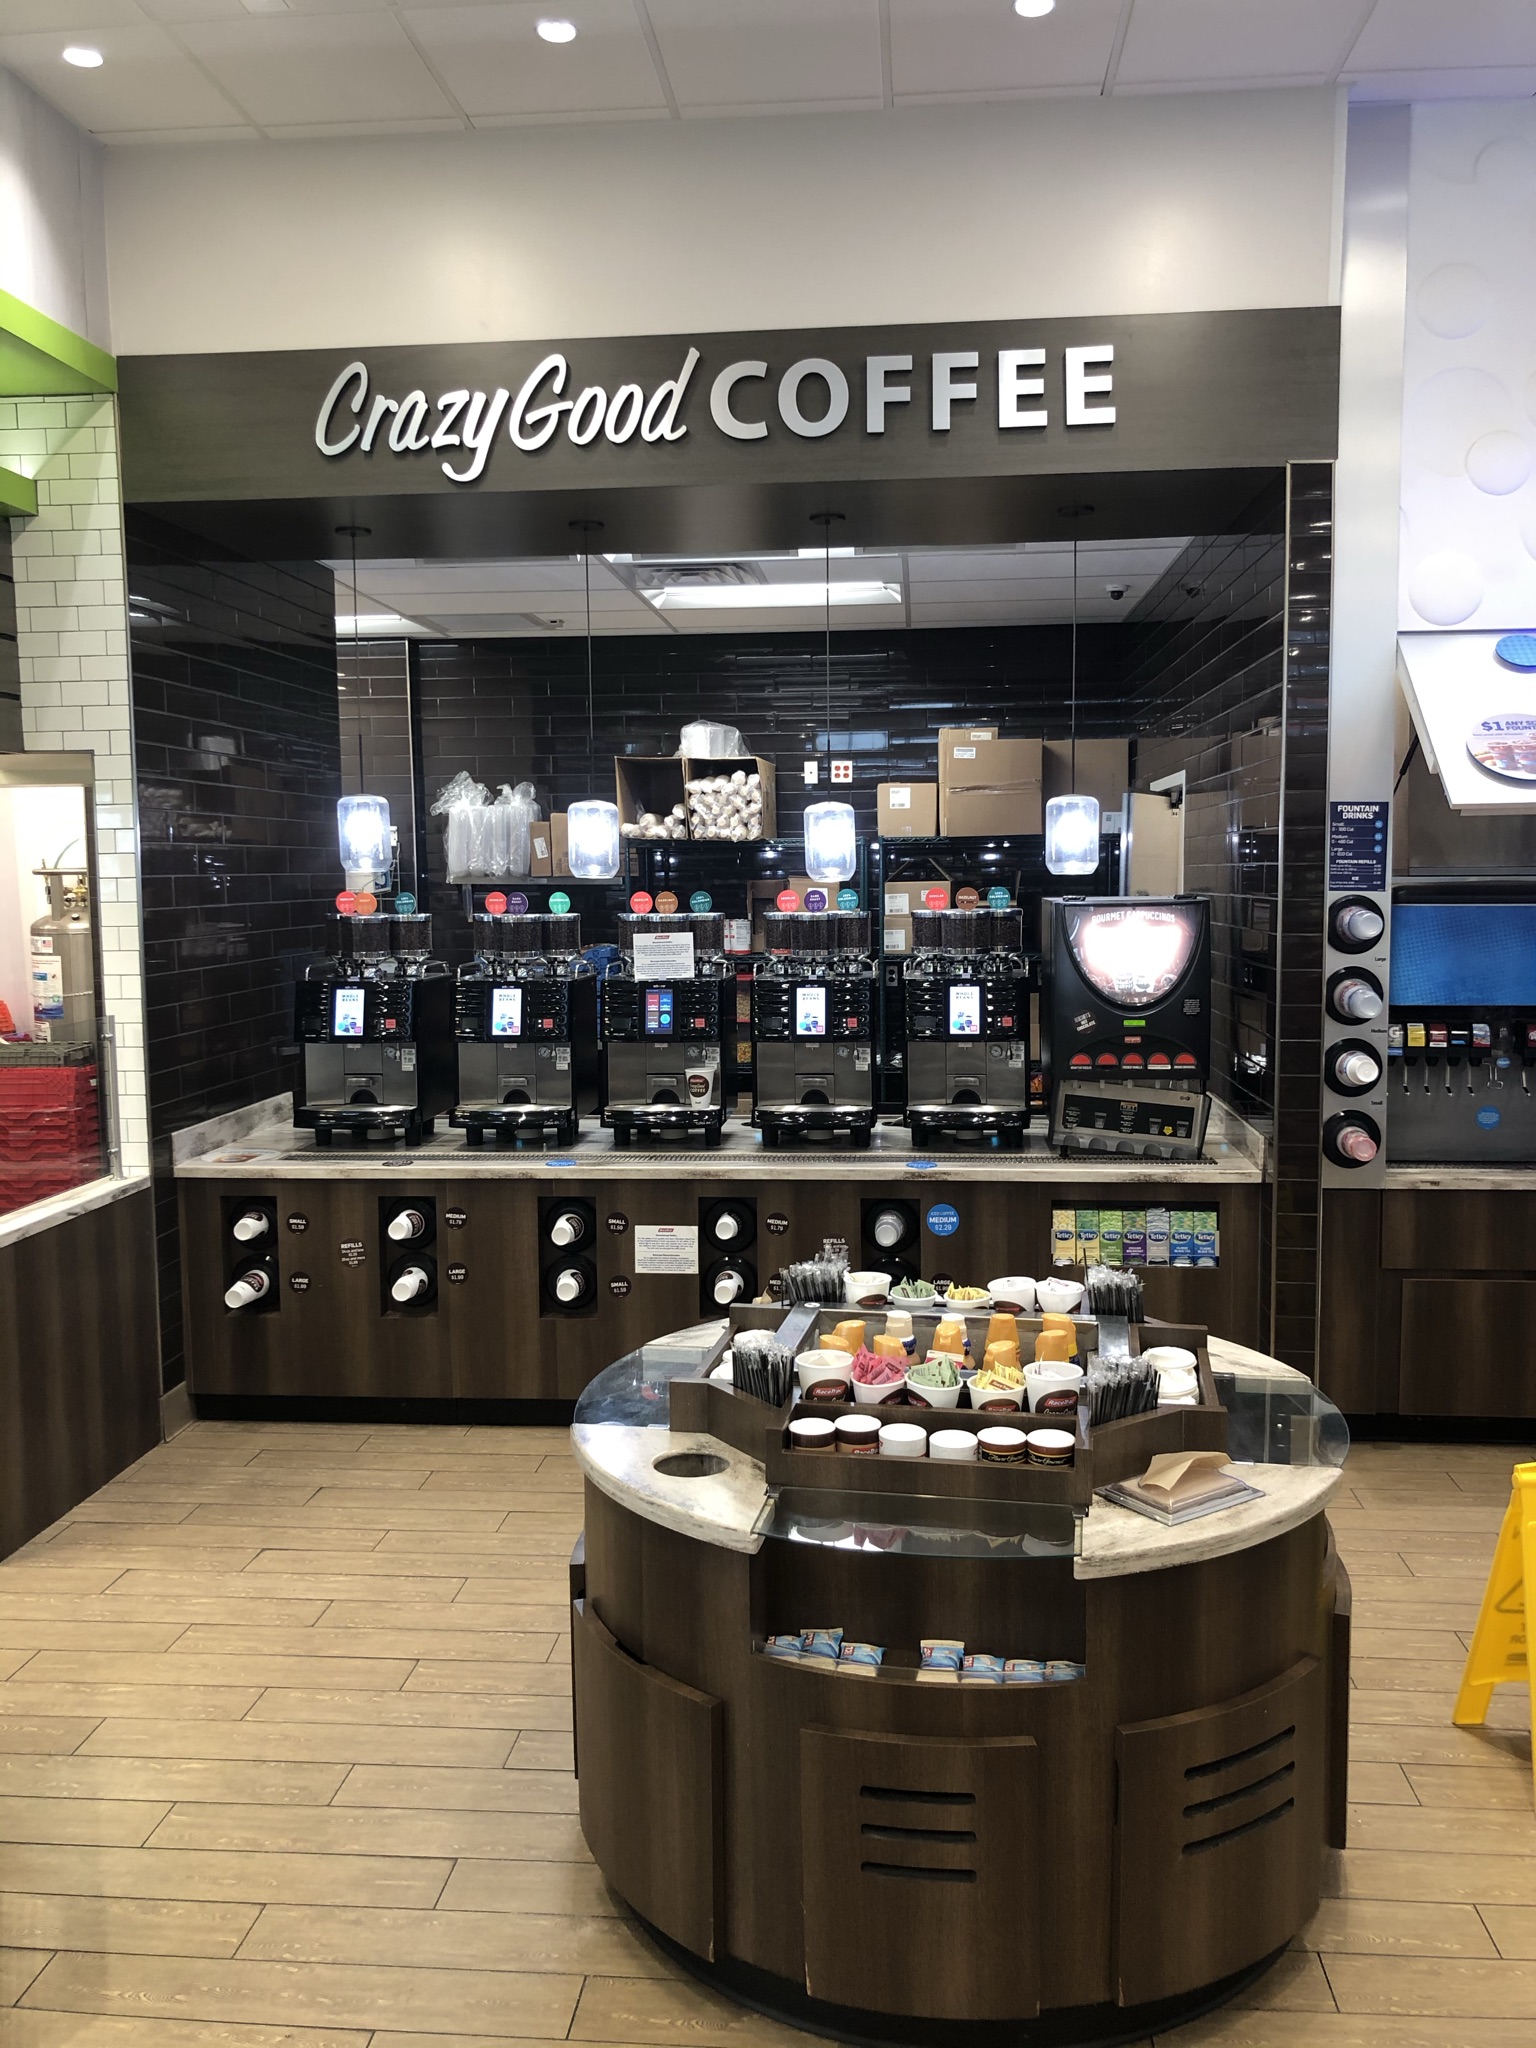 Available property at RaceTrac Coffee Station